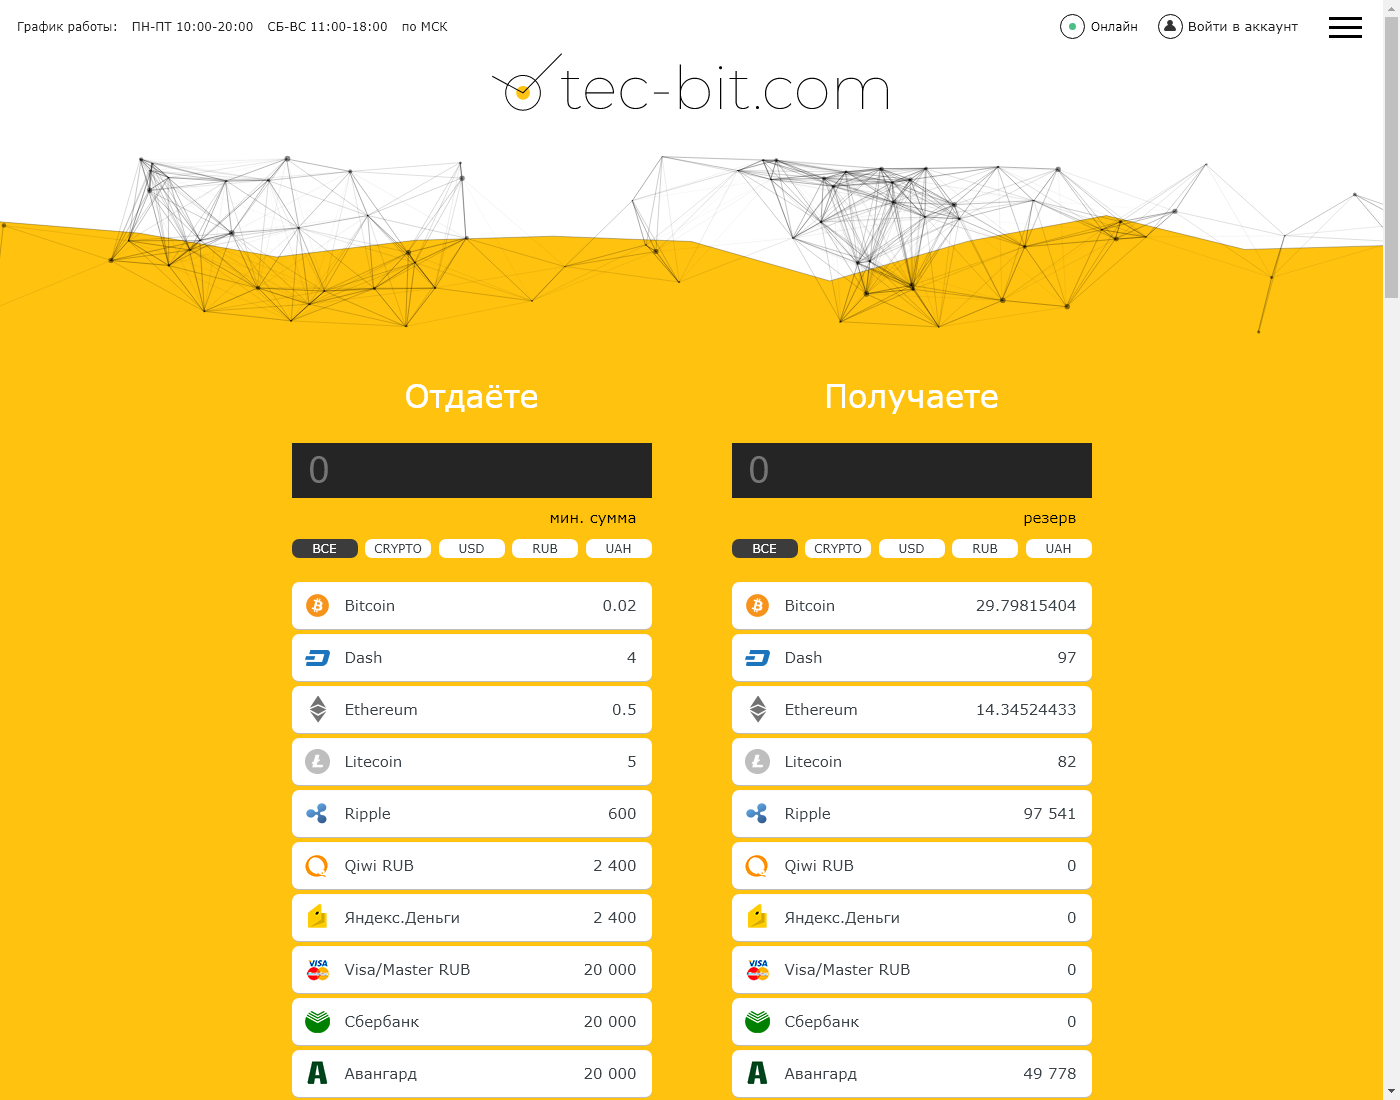 tec-bit user interface: the home page in English